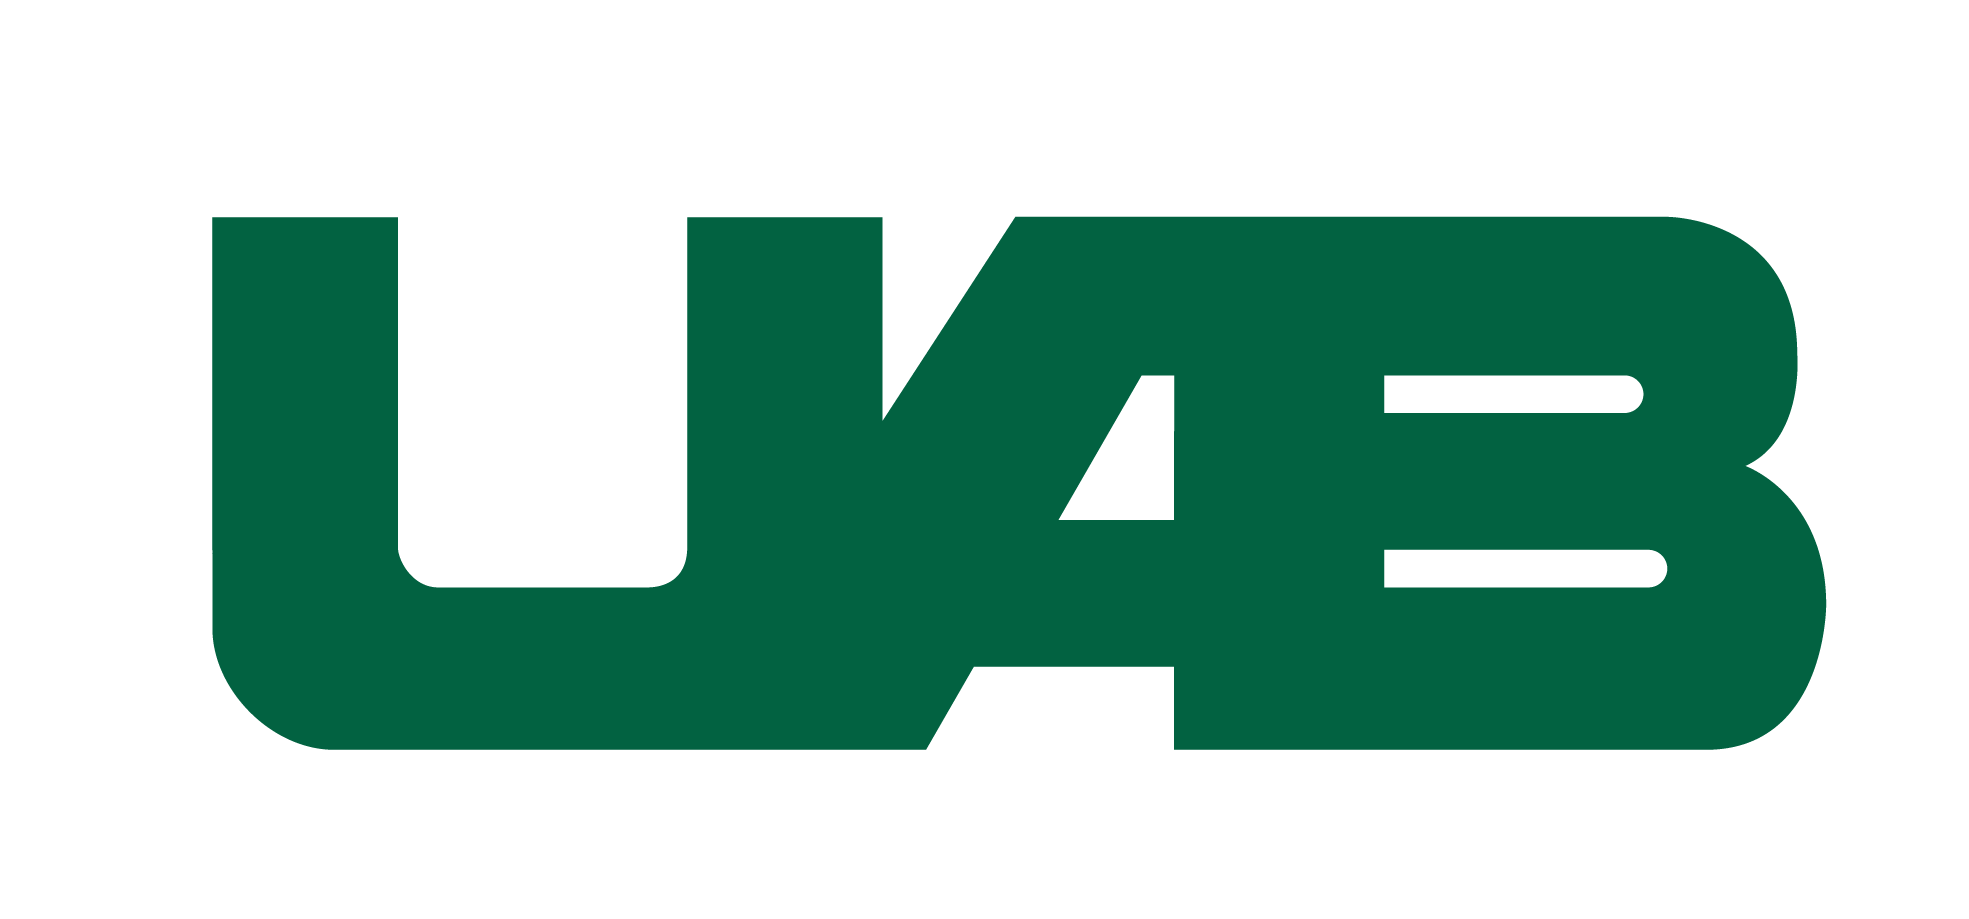 UAB Supports Birmingham Promise Scholarship; Will Offer Free Tuition to